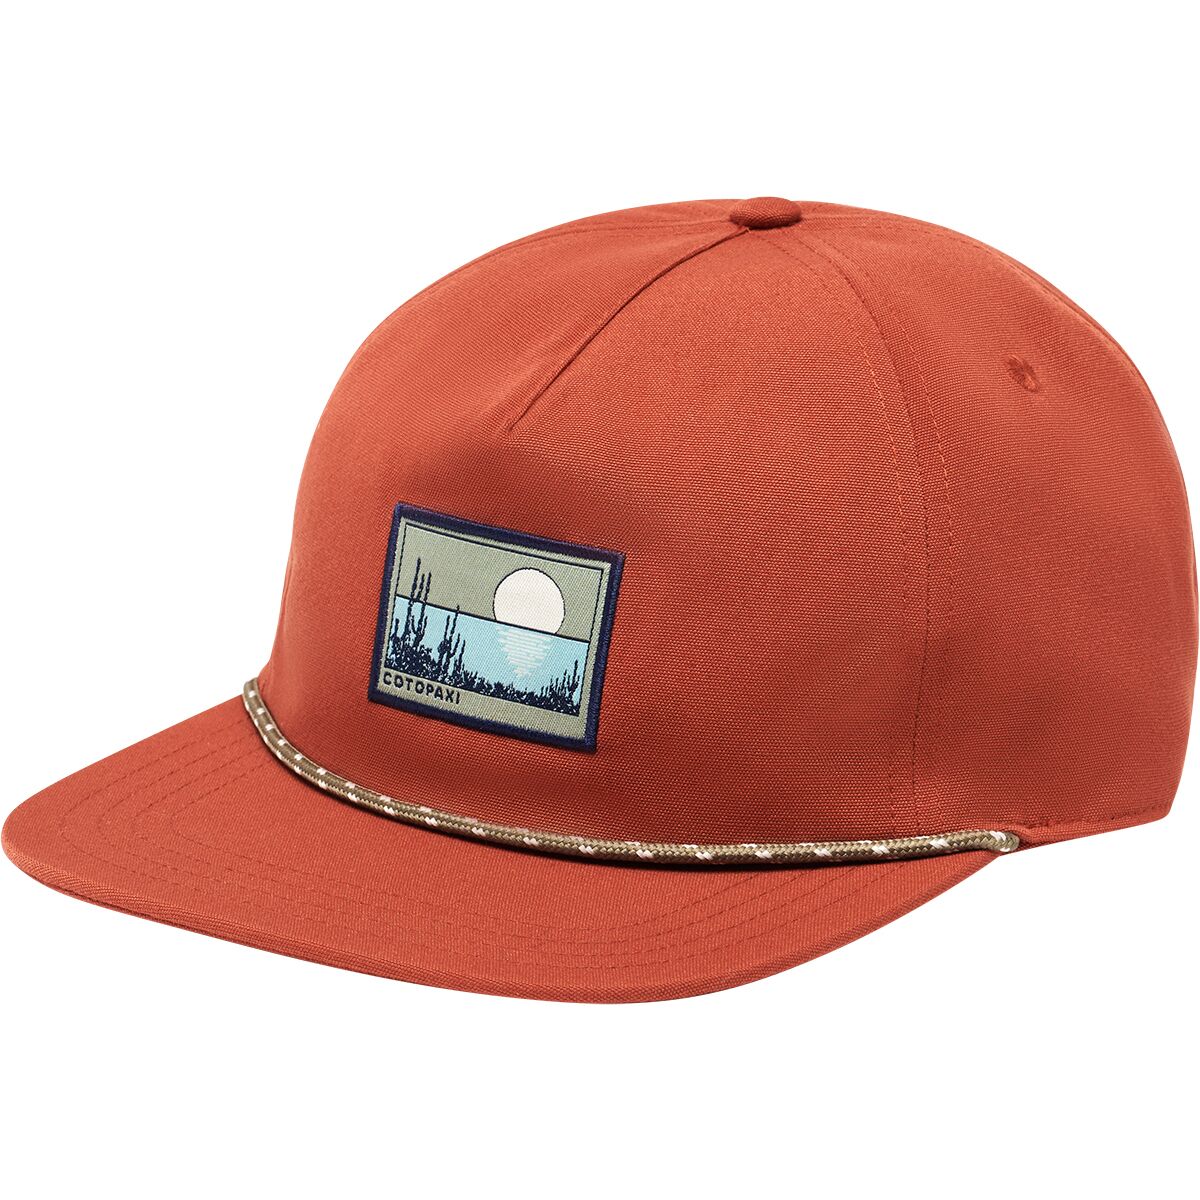 Desert View Heritage Rope Hat by Cotopaxi | US-Parks.com